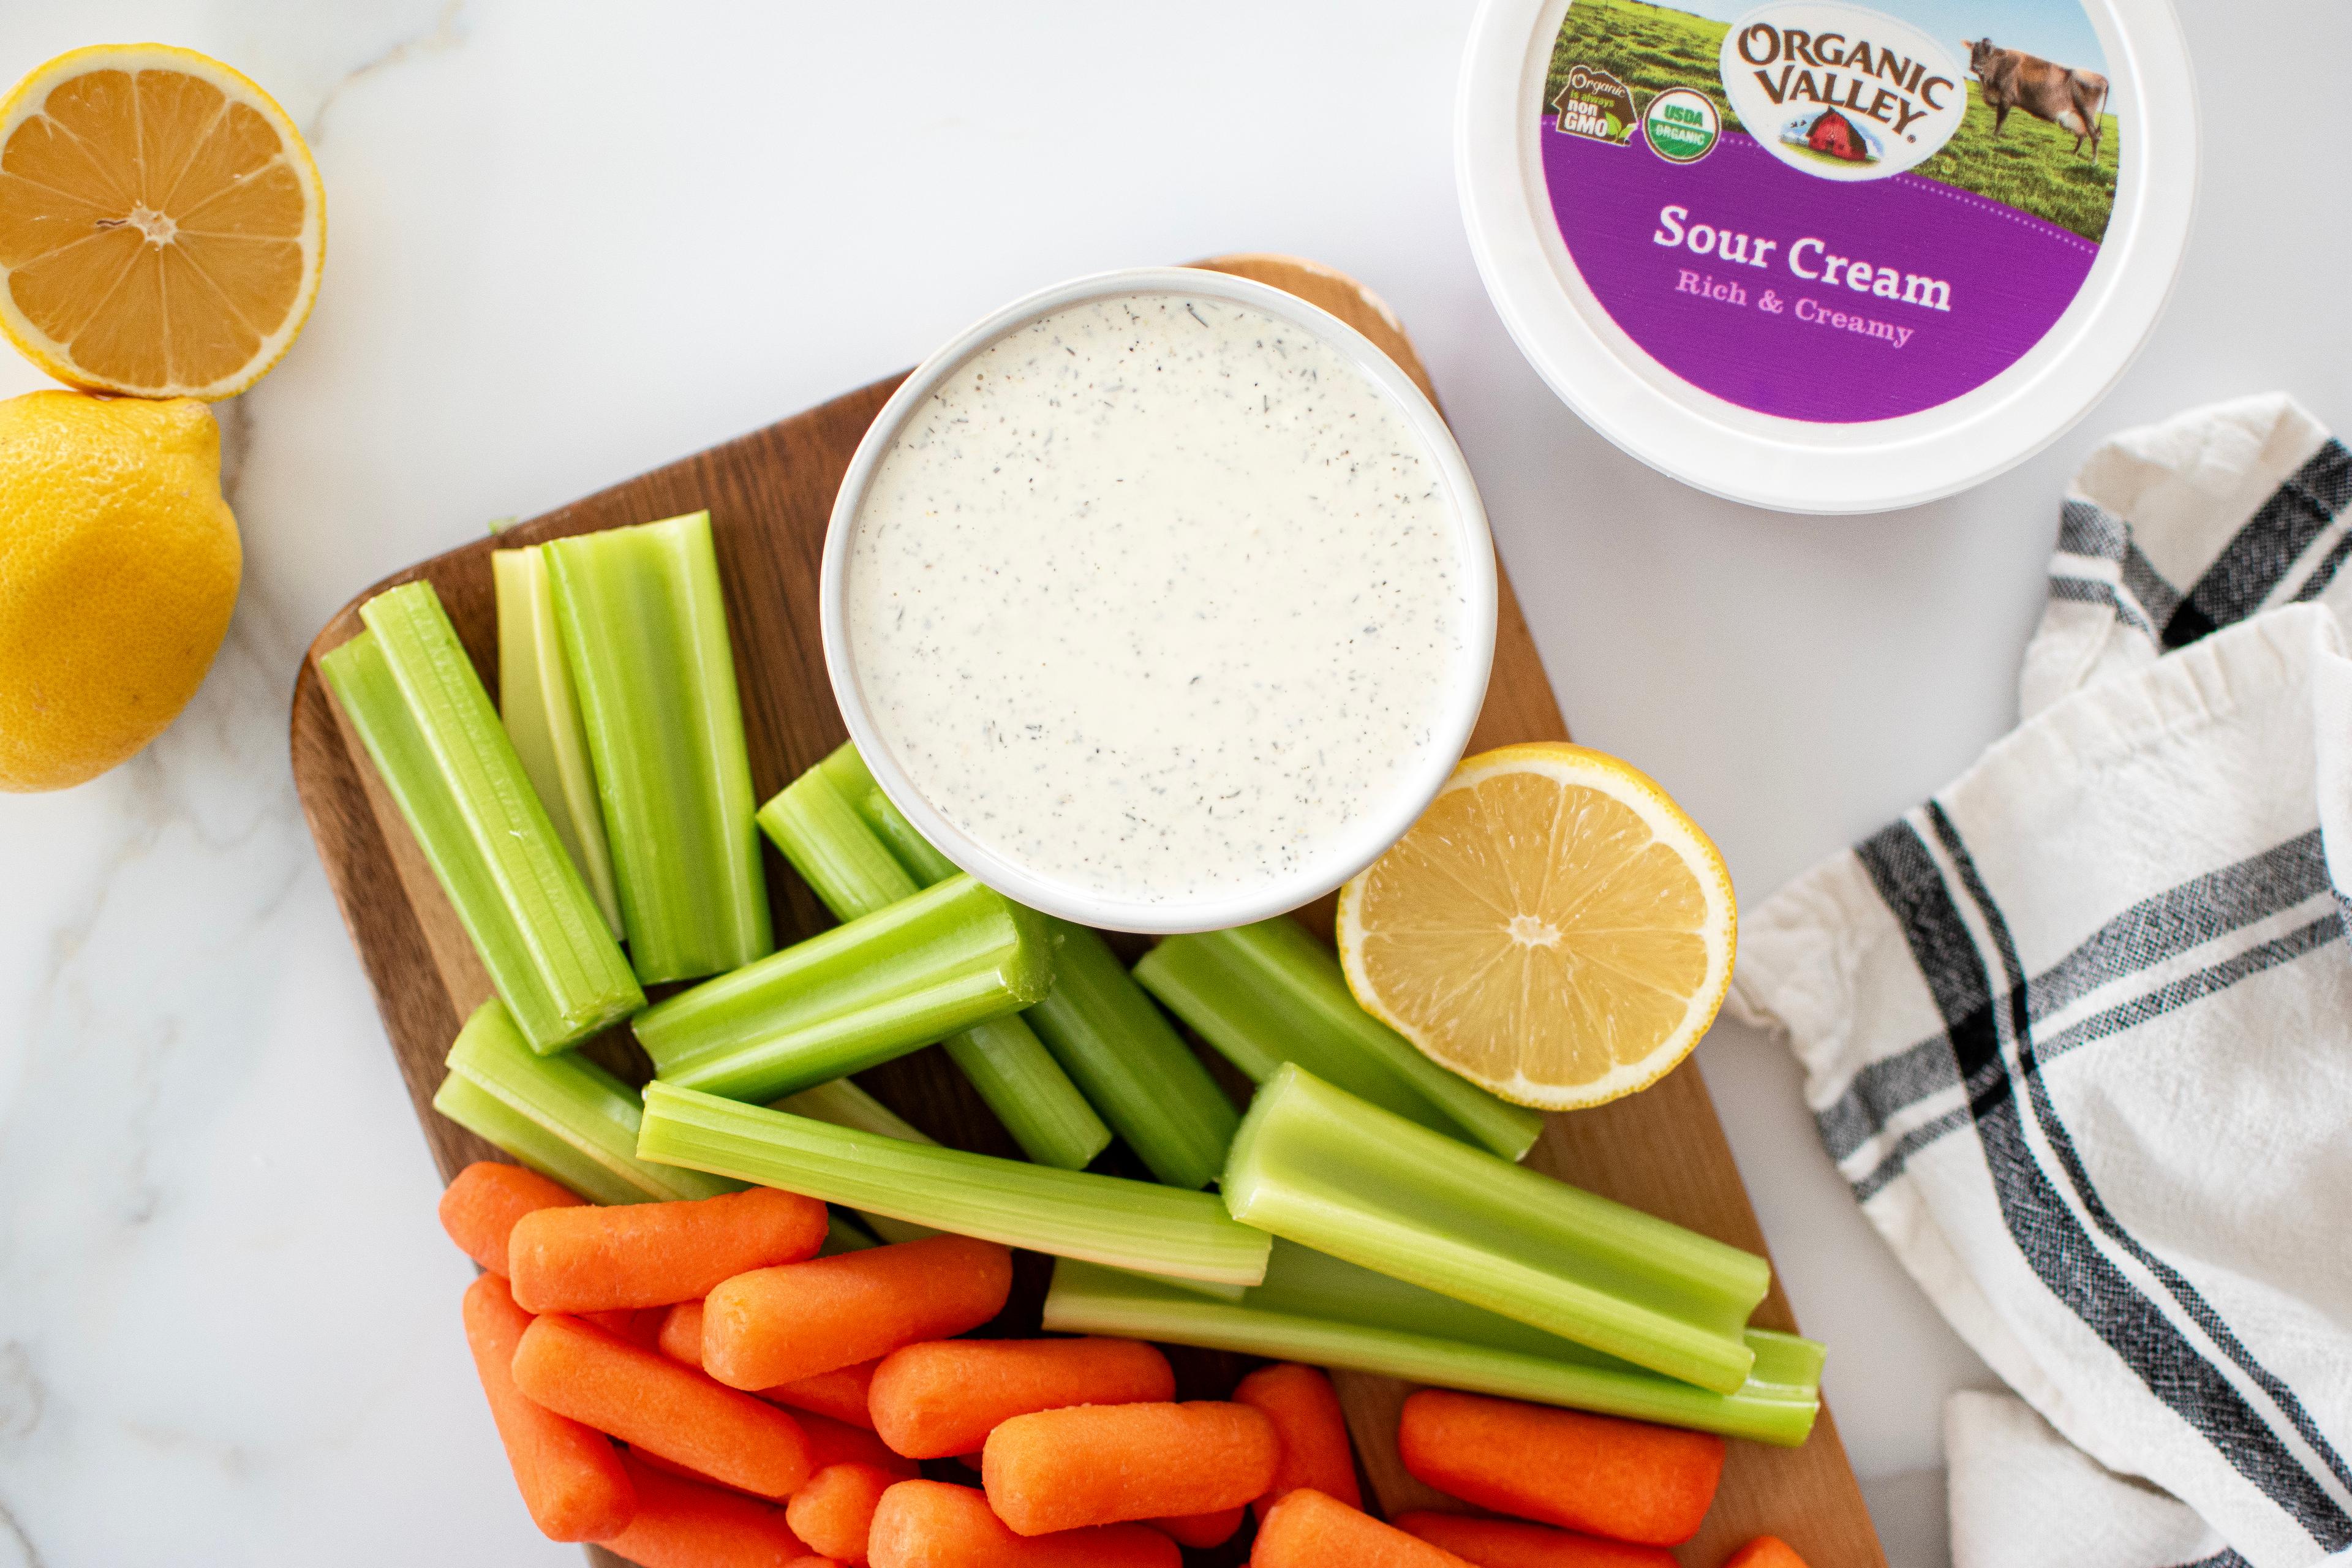 Garlic Lemon Dill Dip displayed on a cutting board with lemon, carrots and celery.